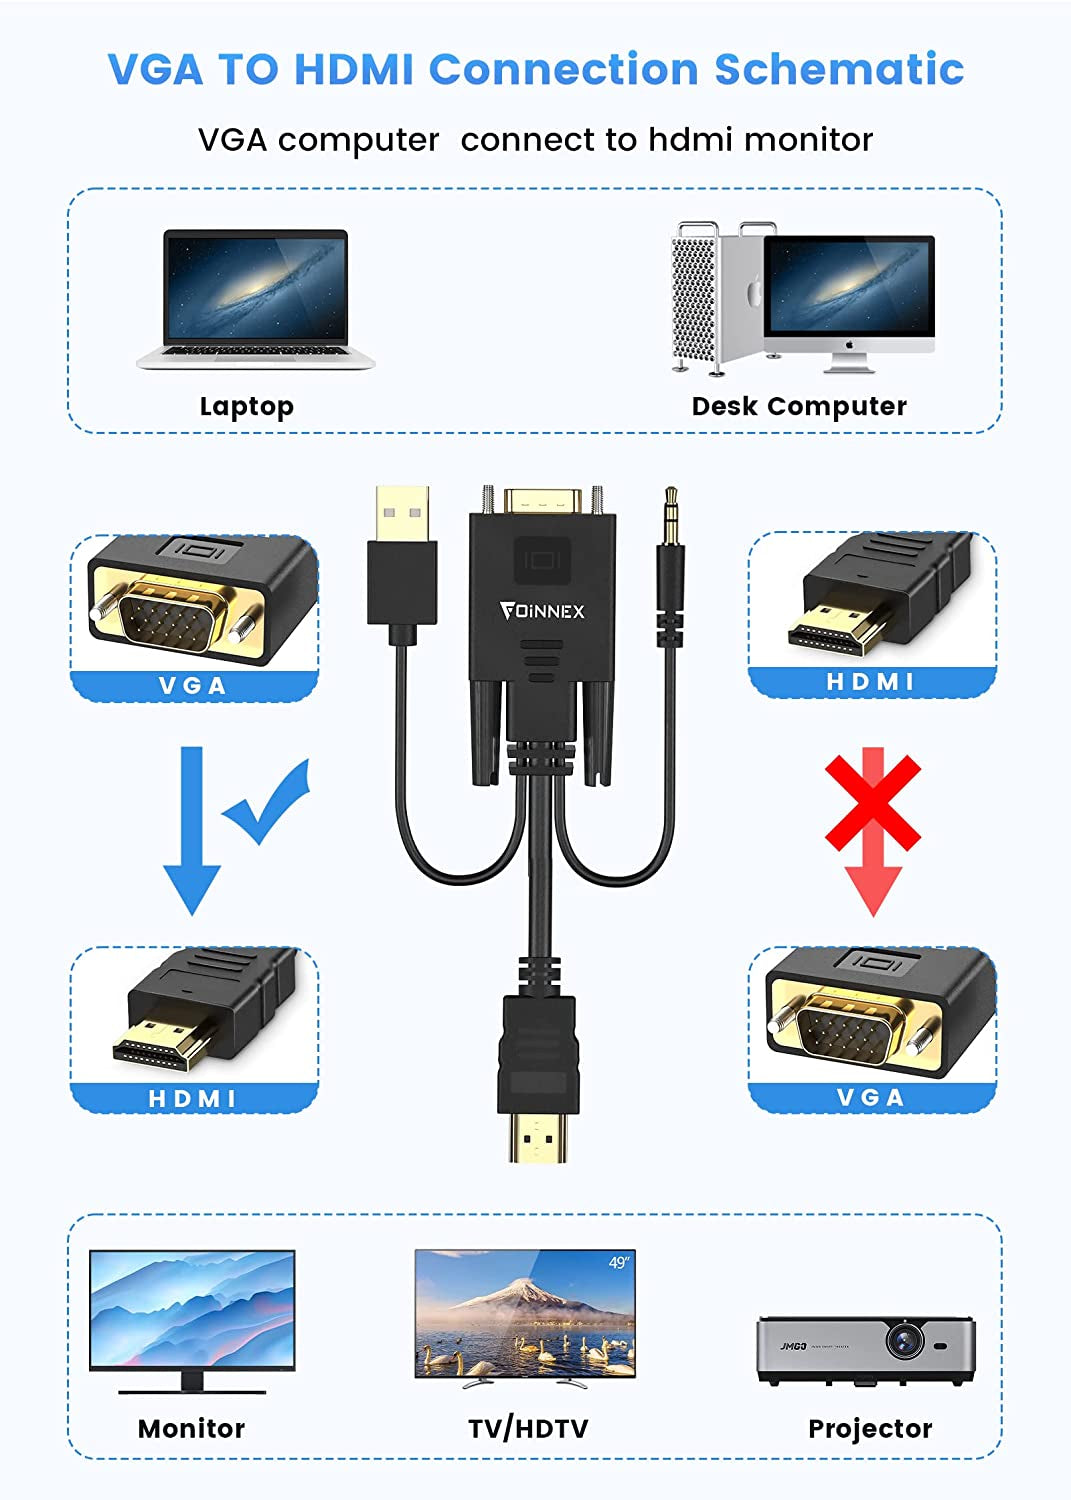 VGA to HDMI Adapter Cable 10FT/3M (Old PC to New Tv/Monitor with HDMI), VGA to HDMI Converter Cable with Audio for Connecting Laptop with Vga(D-Sub,Hd 15-Pin) to New Monitor,Hdtv.Male to Male